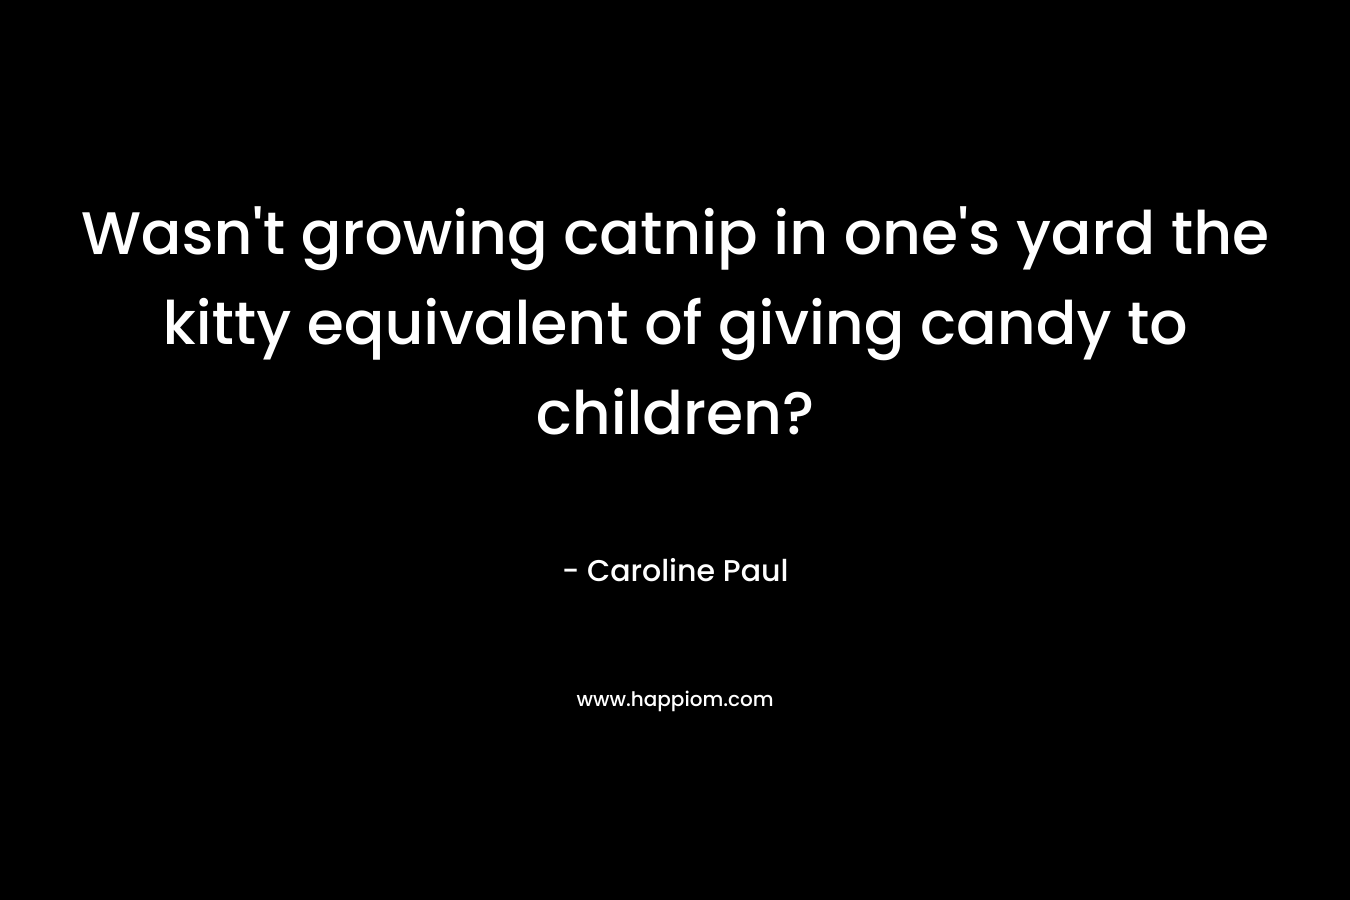 Wasn’t growing catnip in one’s yard the kitty equivalent of giving candy to children? – Caroline Paul